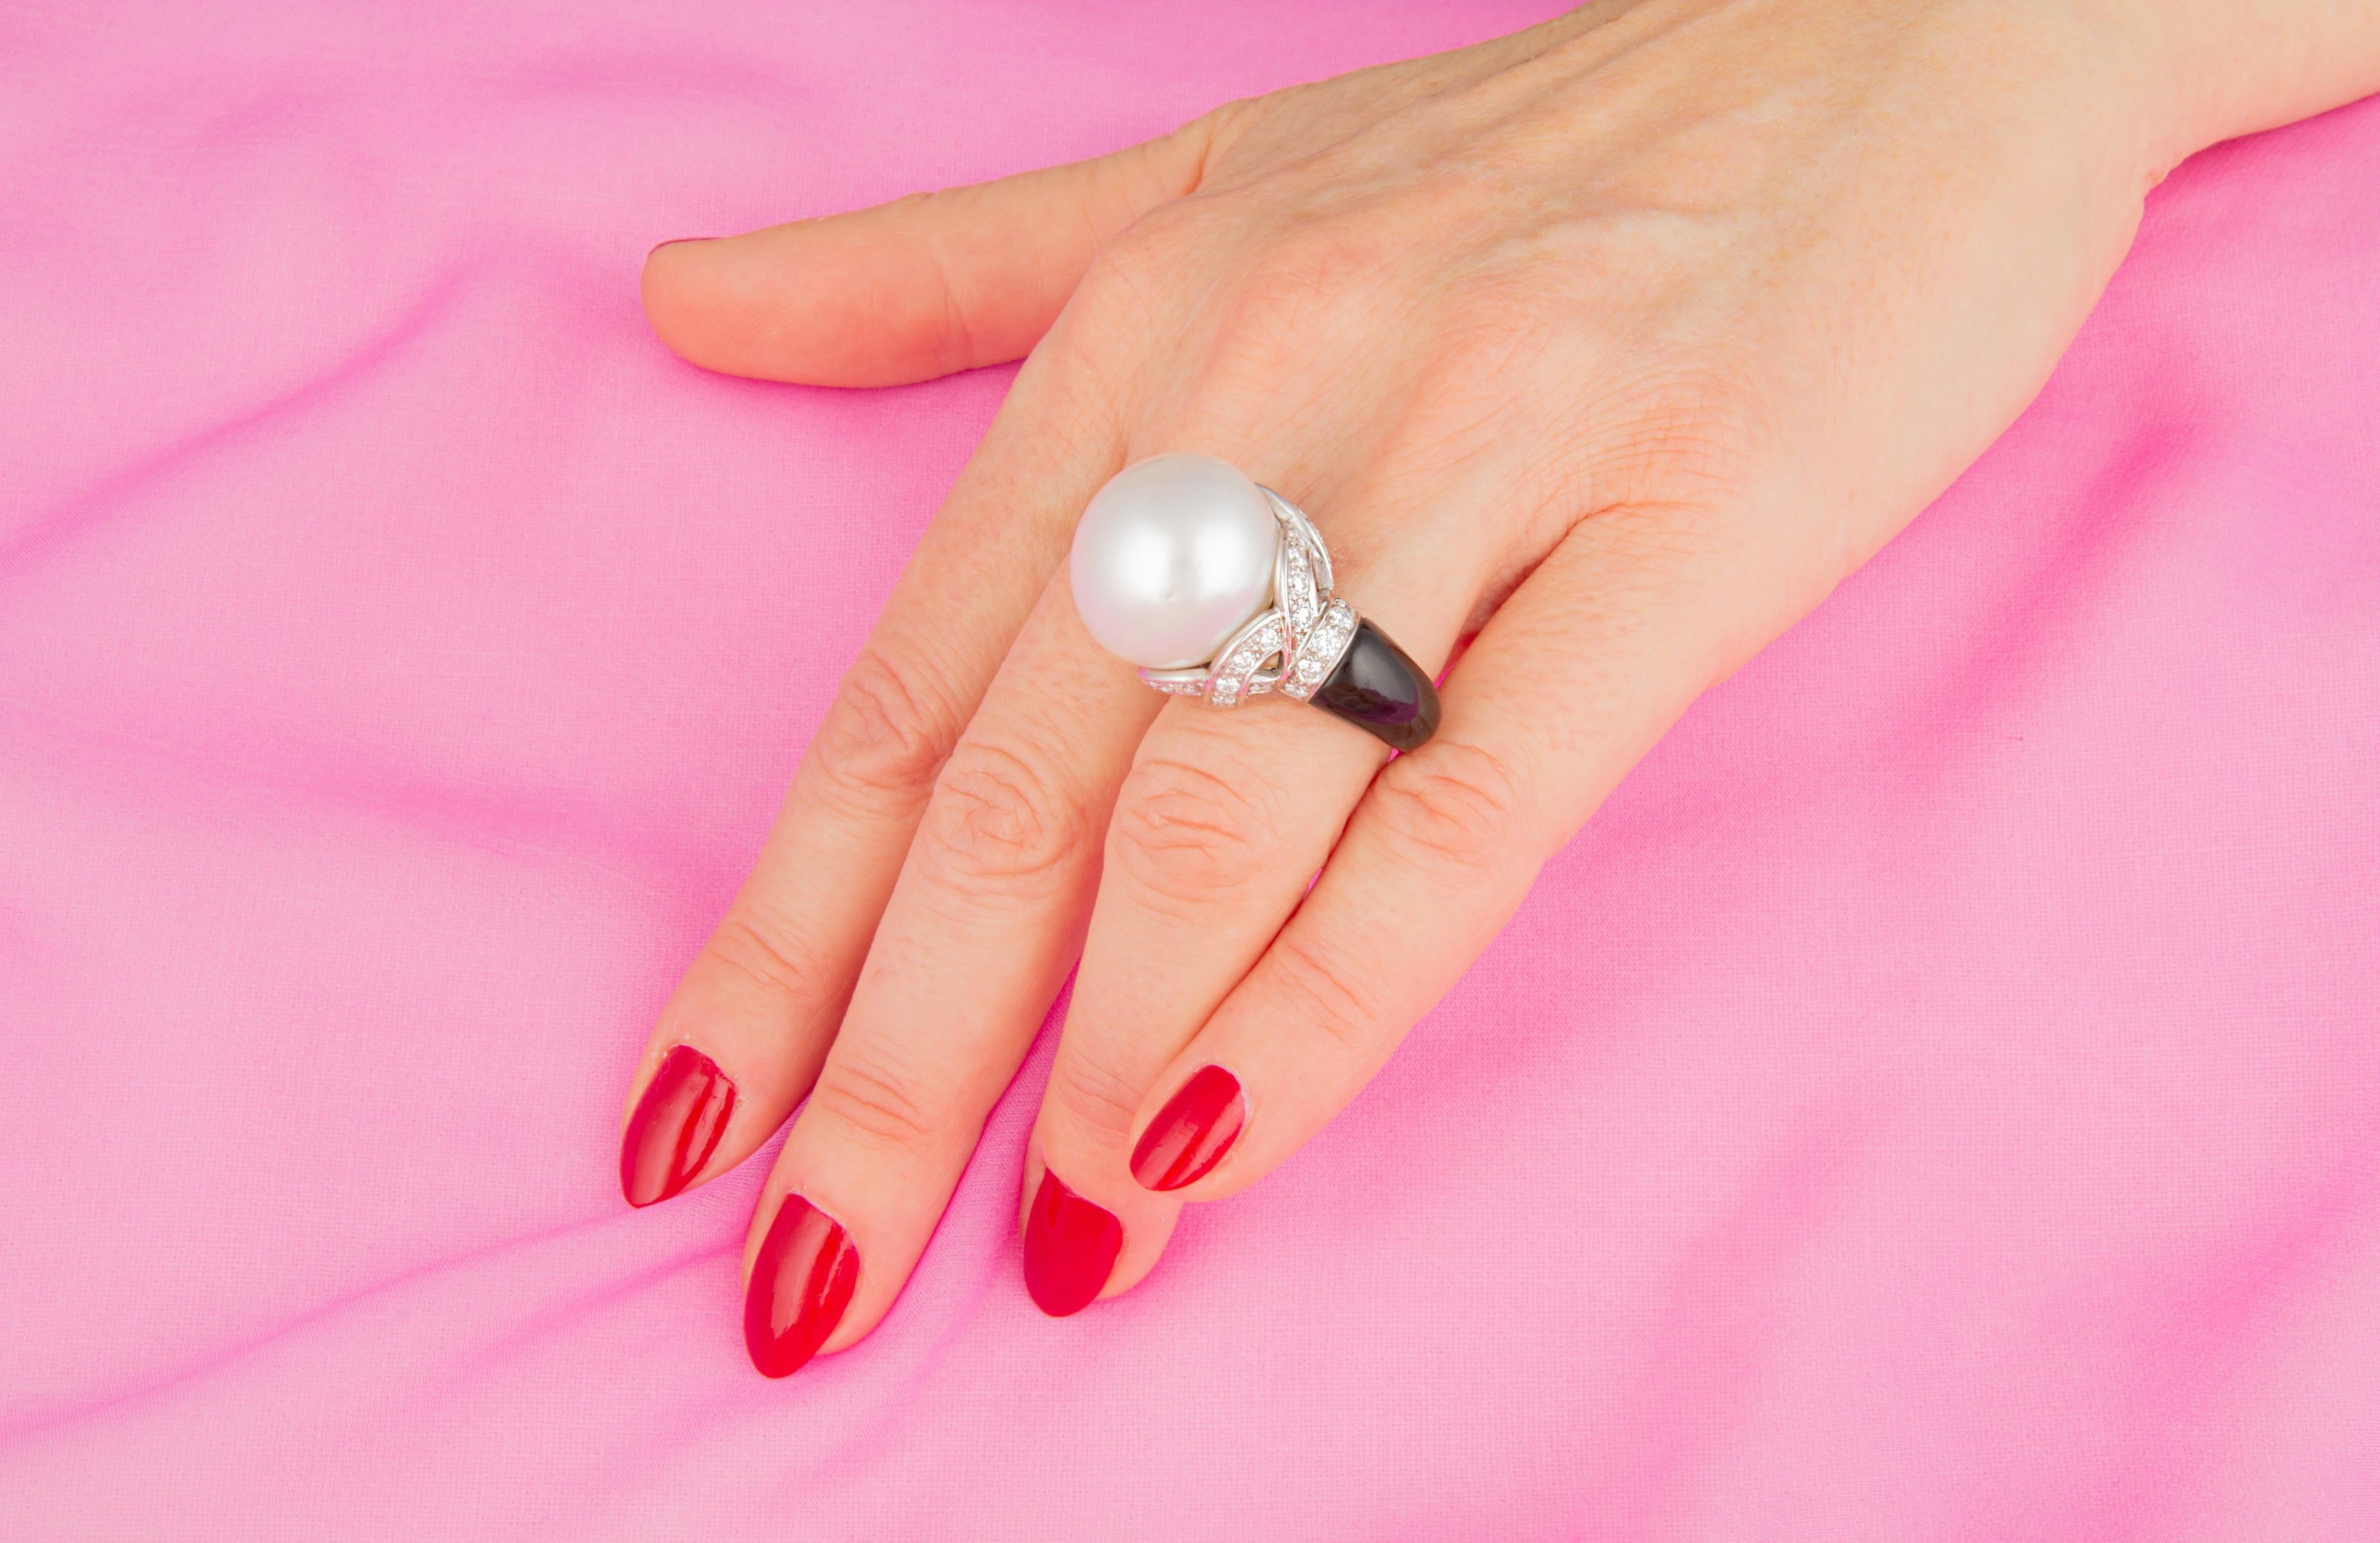 This South Sea pearl and diamond cocktail ring features an exceptionally large and beautiful Australian pearl of the rare dimension of 19.5mm diameter. The pearl is untreated. It displays a fine quality nacre and its natural color and luster have